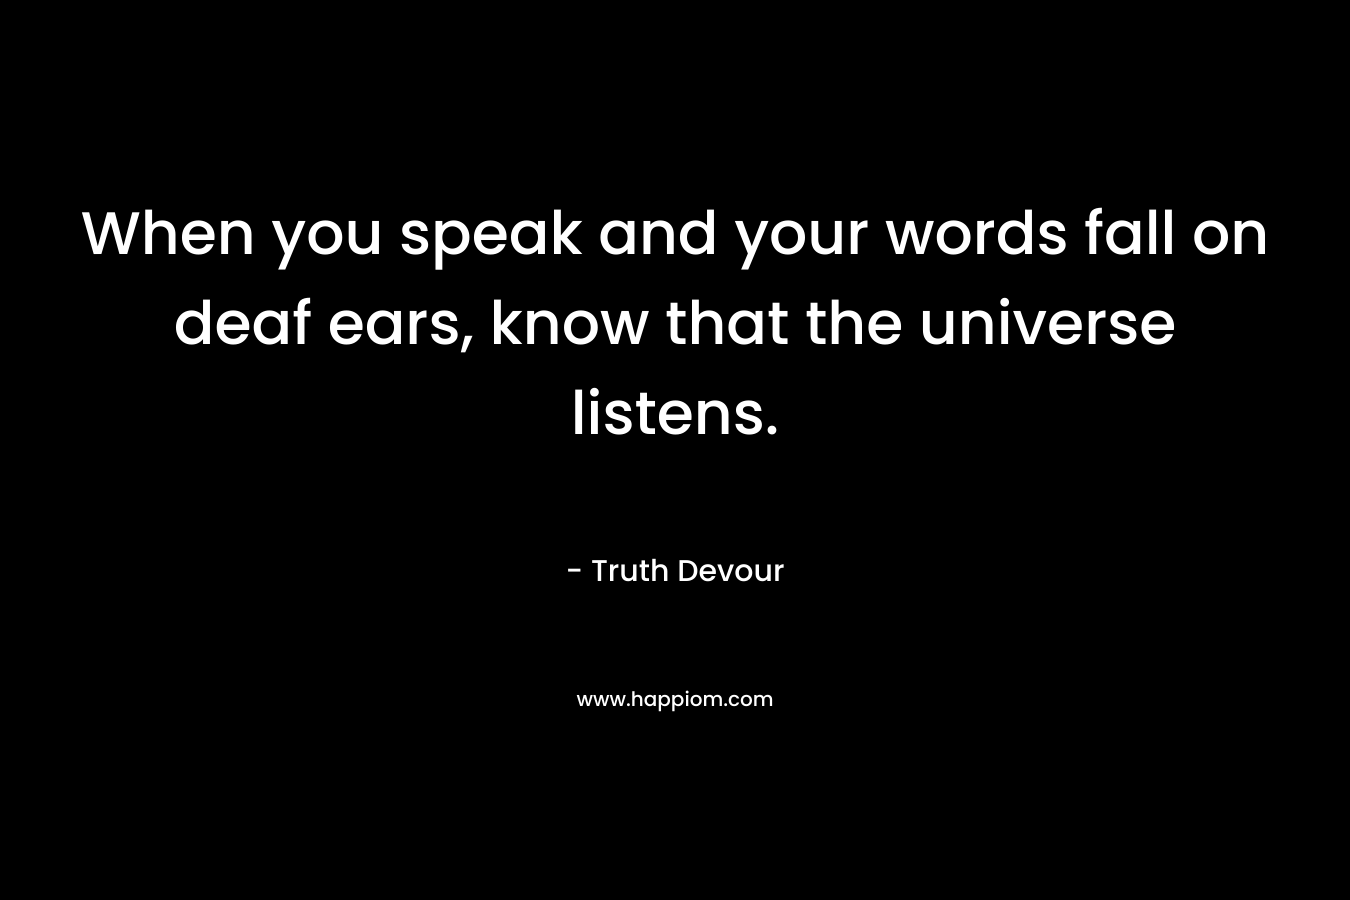 When you speak and your words fall on deaf ears, know that the universe listens.